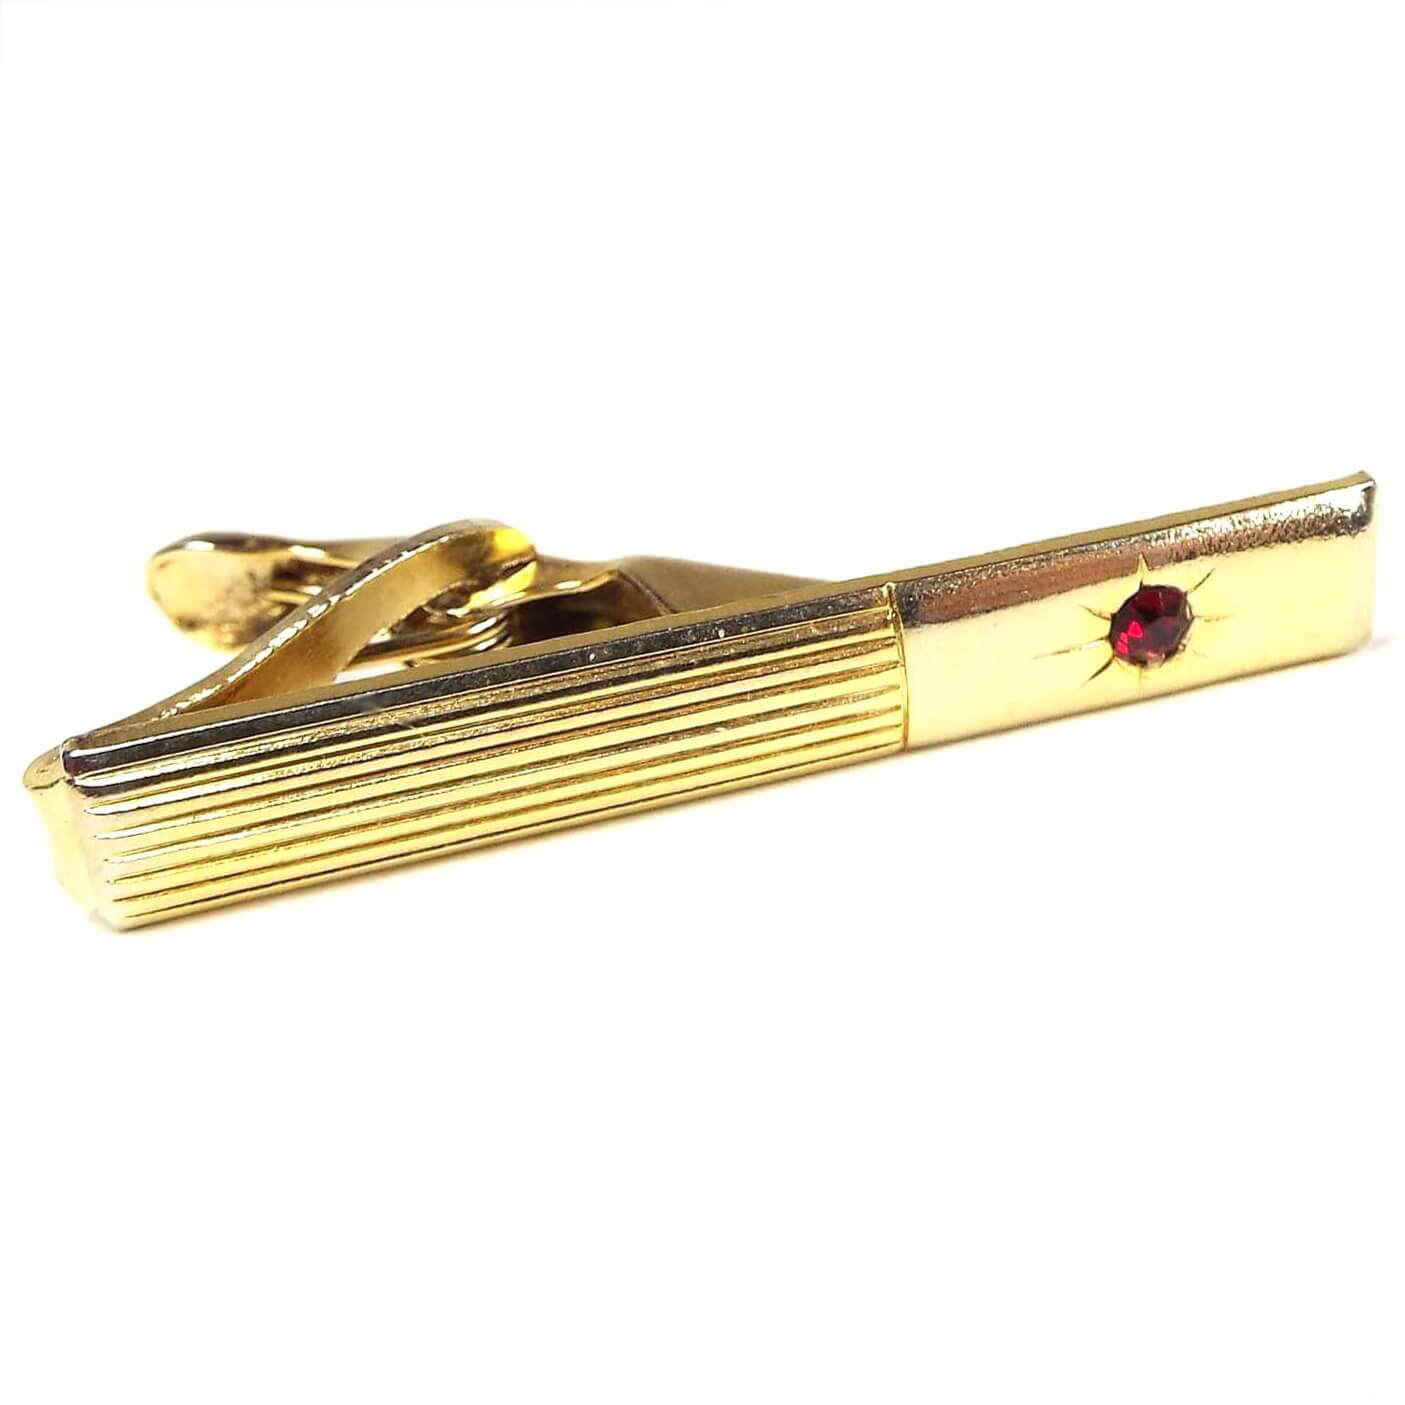 Front view of the retro vintage rhinestone tie clip. The metal is gold tone in color. There are thin raised stripes on one end and the other end has a starburst design with a red rhinestone in the middle.